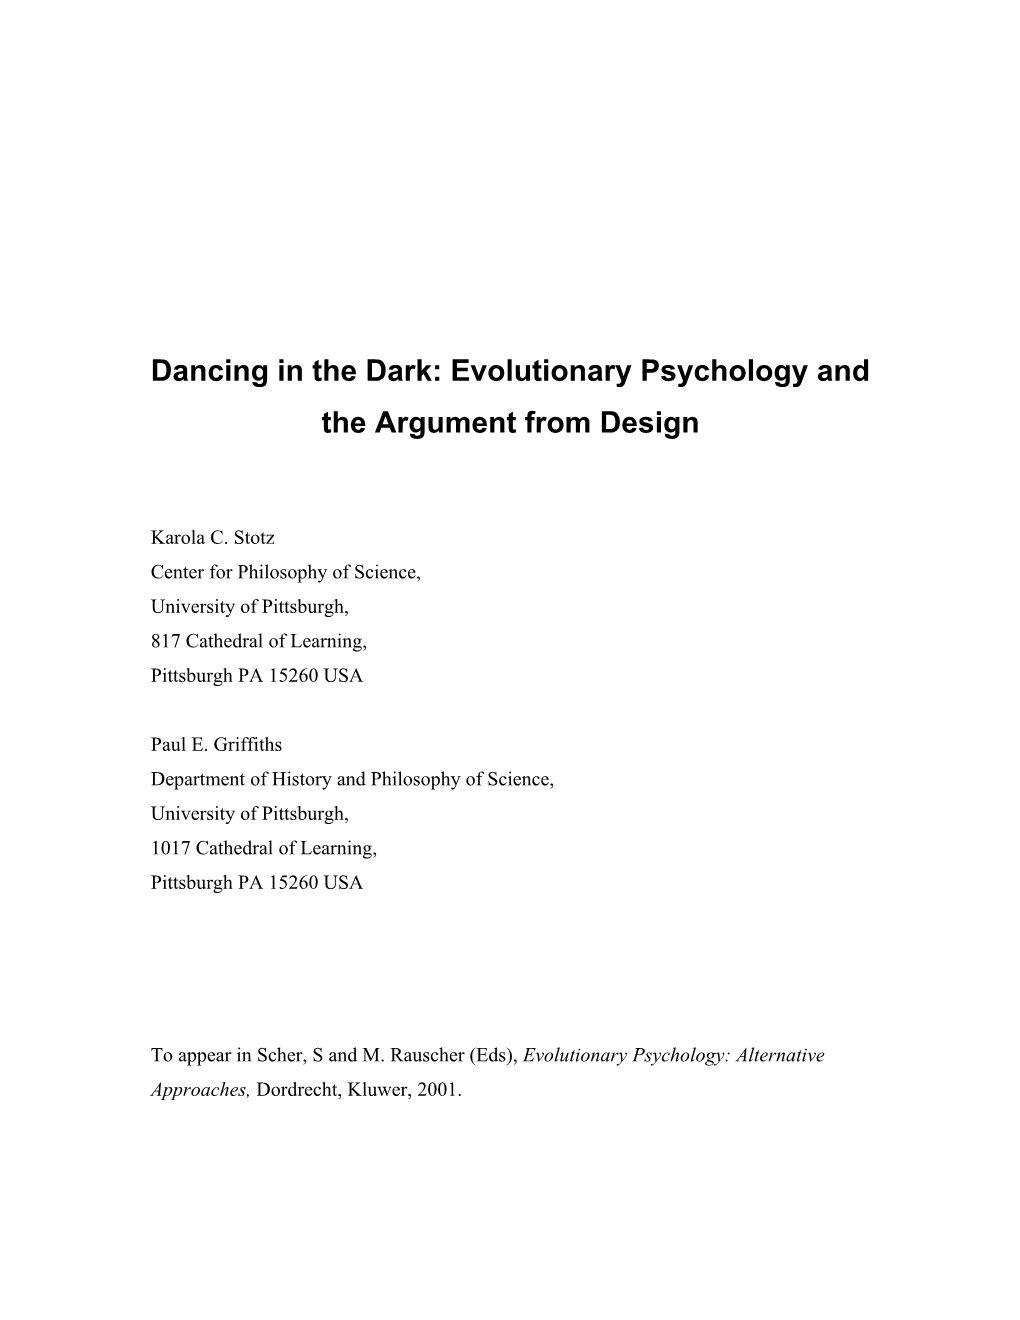 Dancing in the Dark: Evolutionary Psychology and the Argument from Design